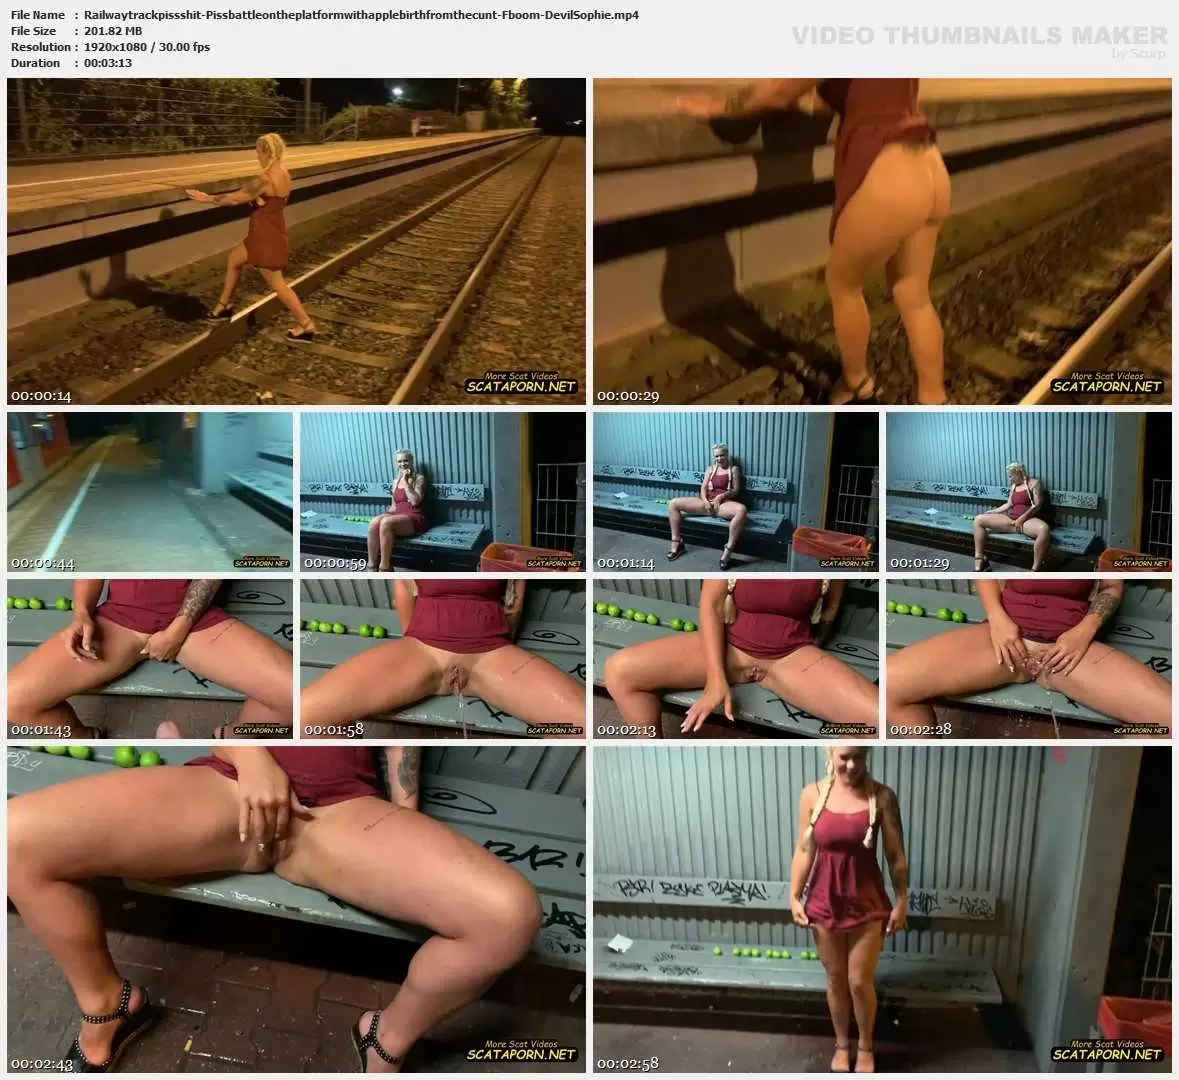 Railway track_piss shit - Pissbattle on the platform with apple birth from the cunt - Fboom - Devil Sophie